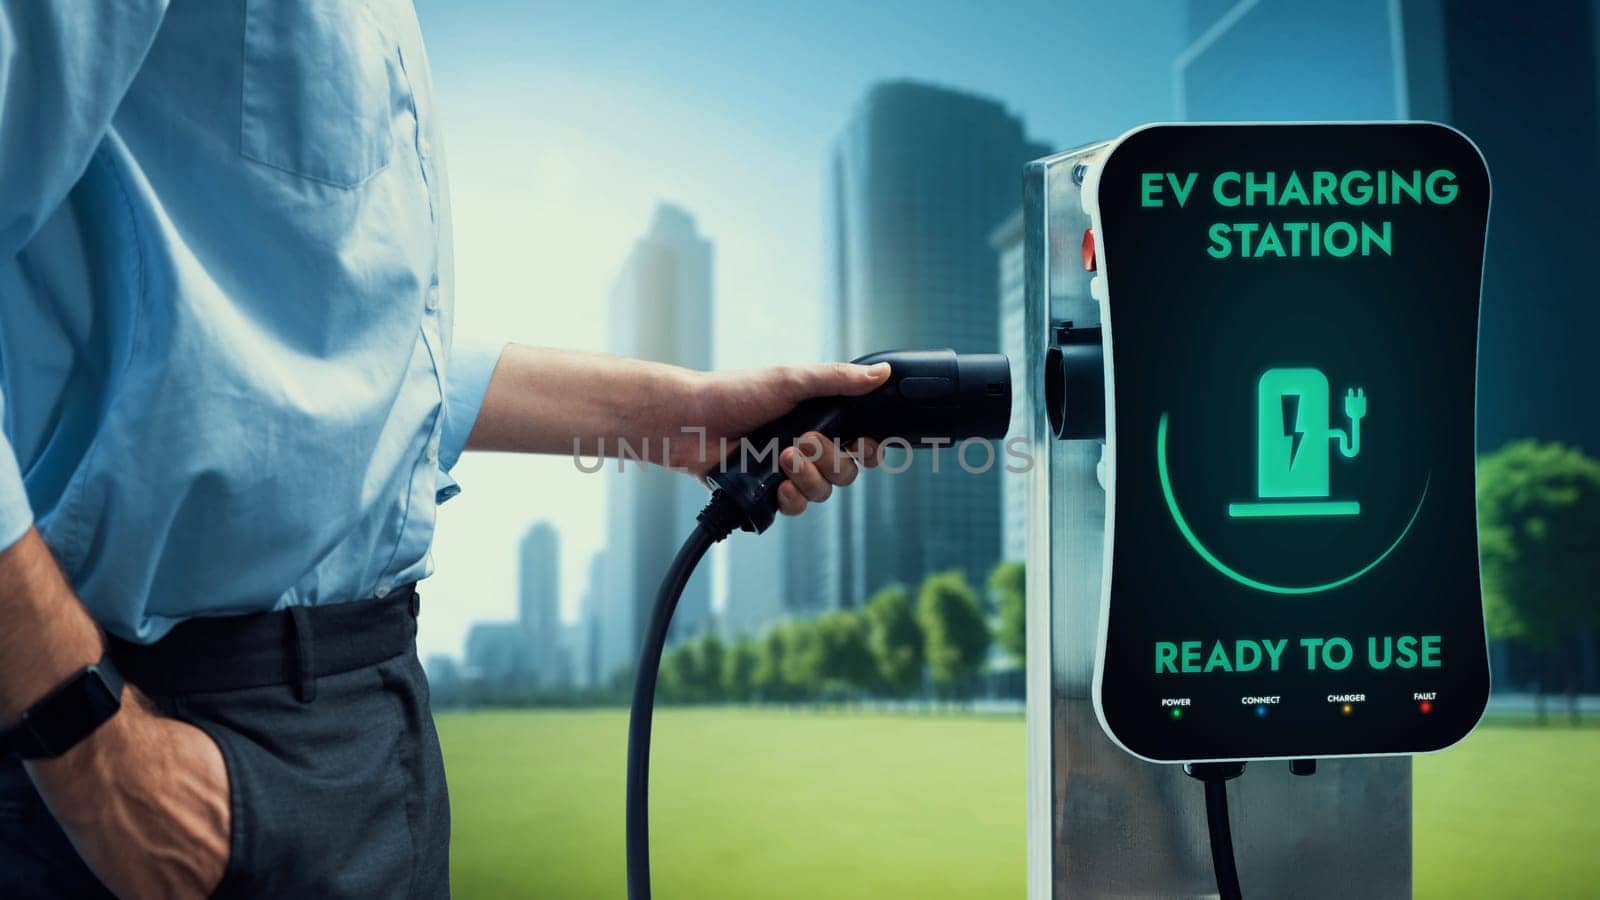 Businessman pull EV charger to recharge his electric car's battery from charging station in green eco city park background. Future innovative EV car and energy sustainability. Peruse